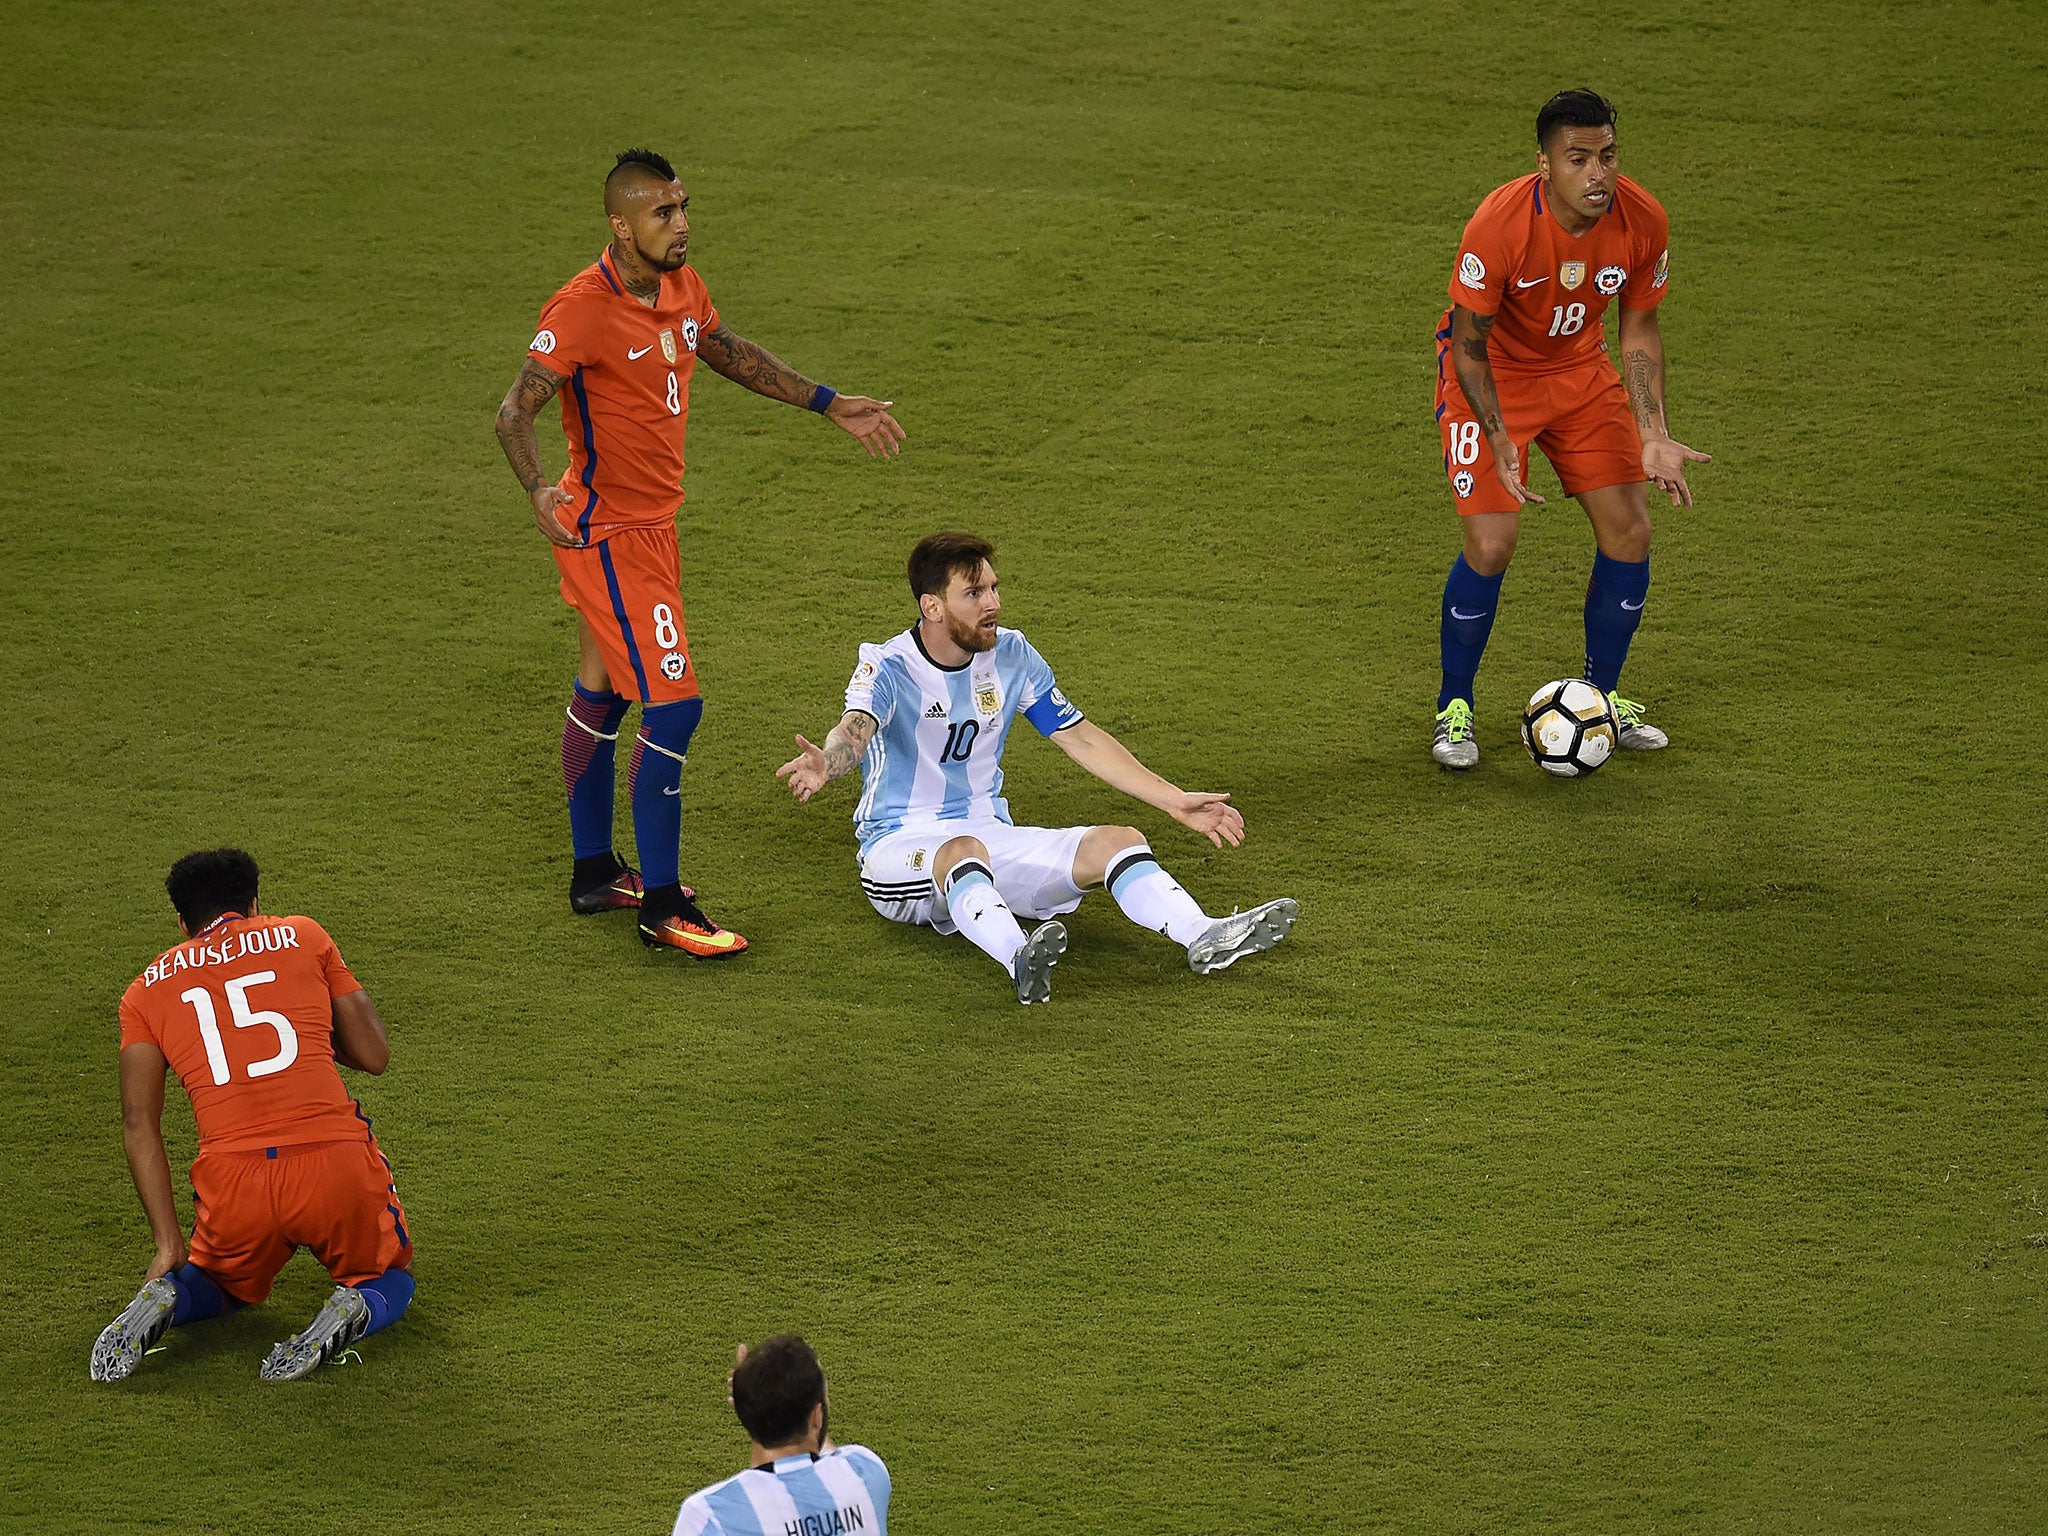 Lionel Messi and Argentina face Chile again for the first time